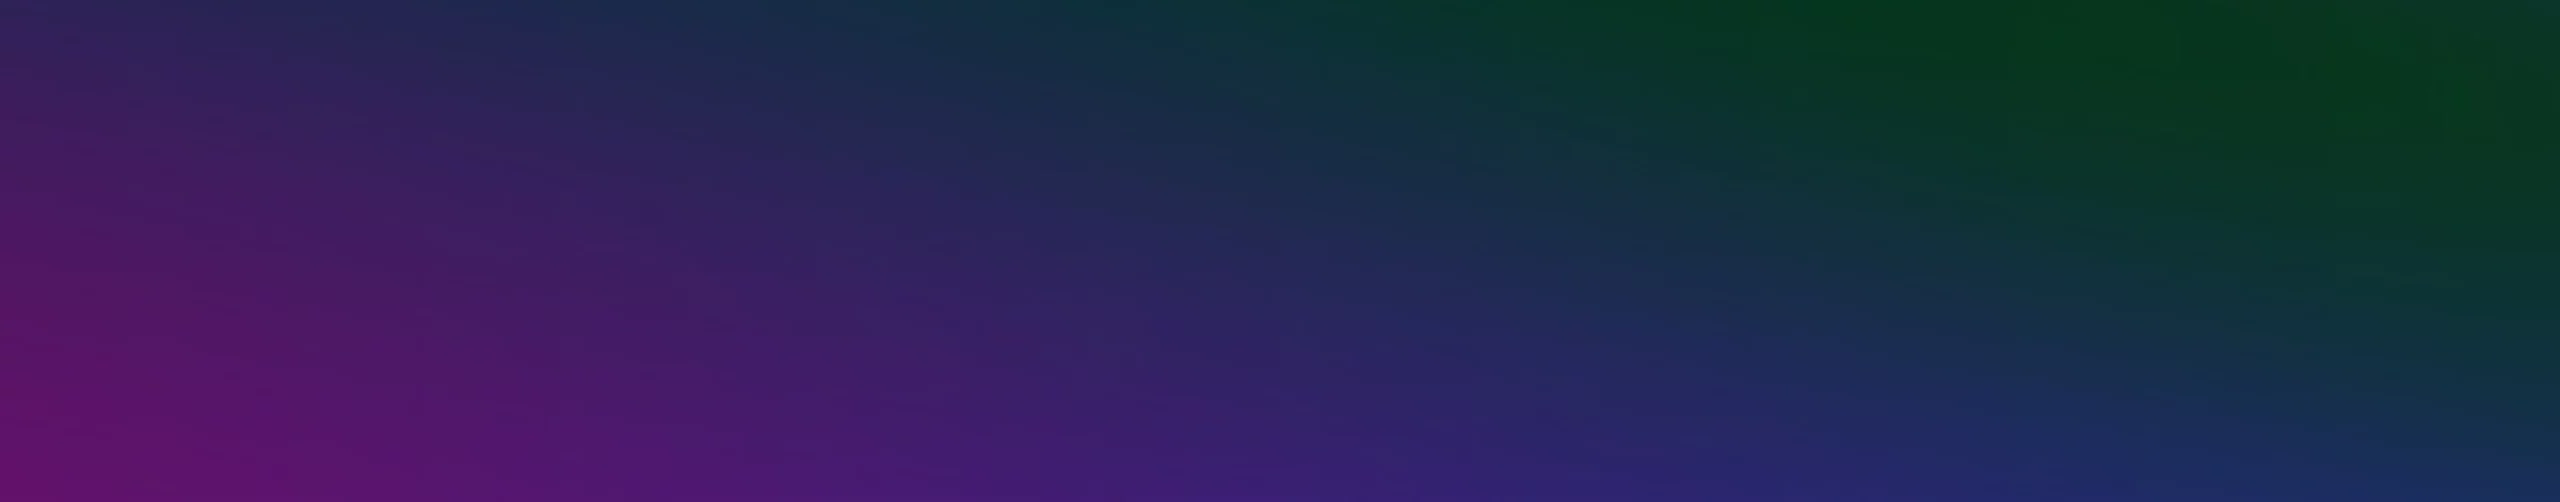 Stylized color-gradient banner